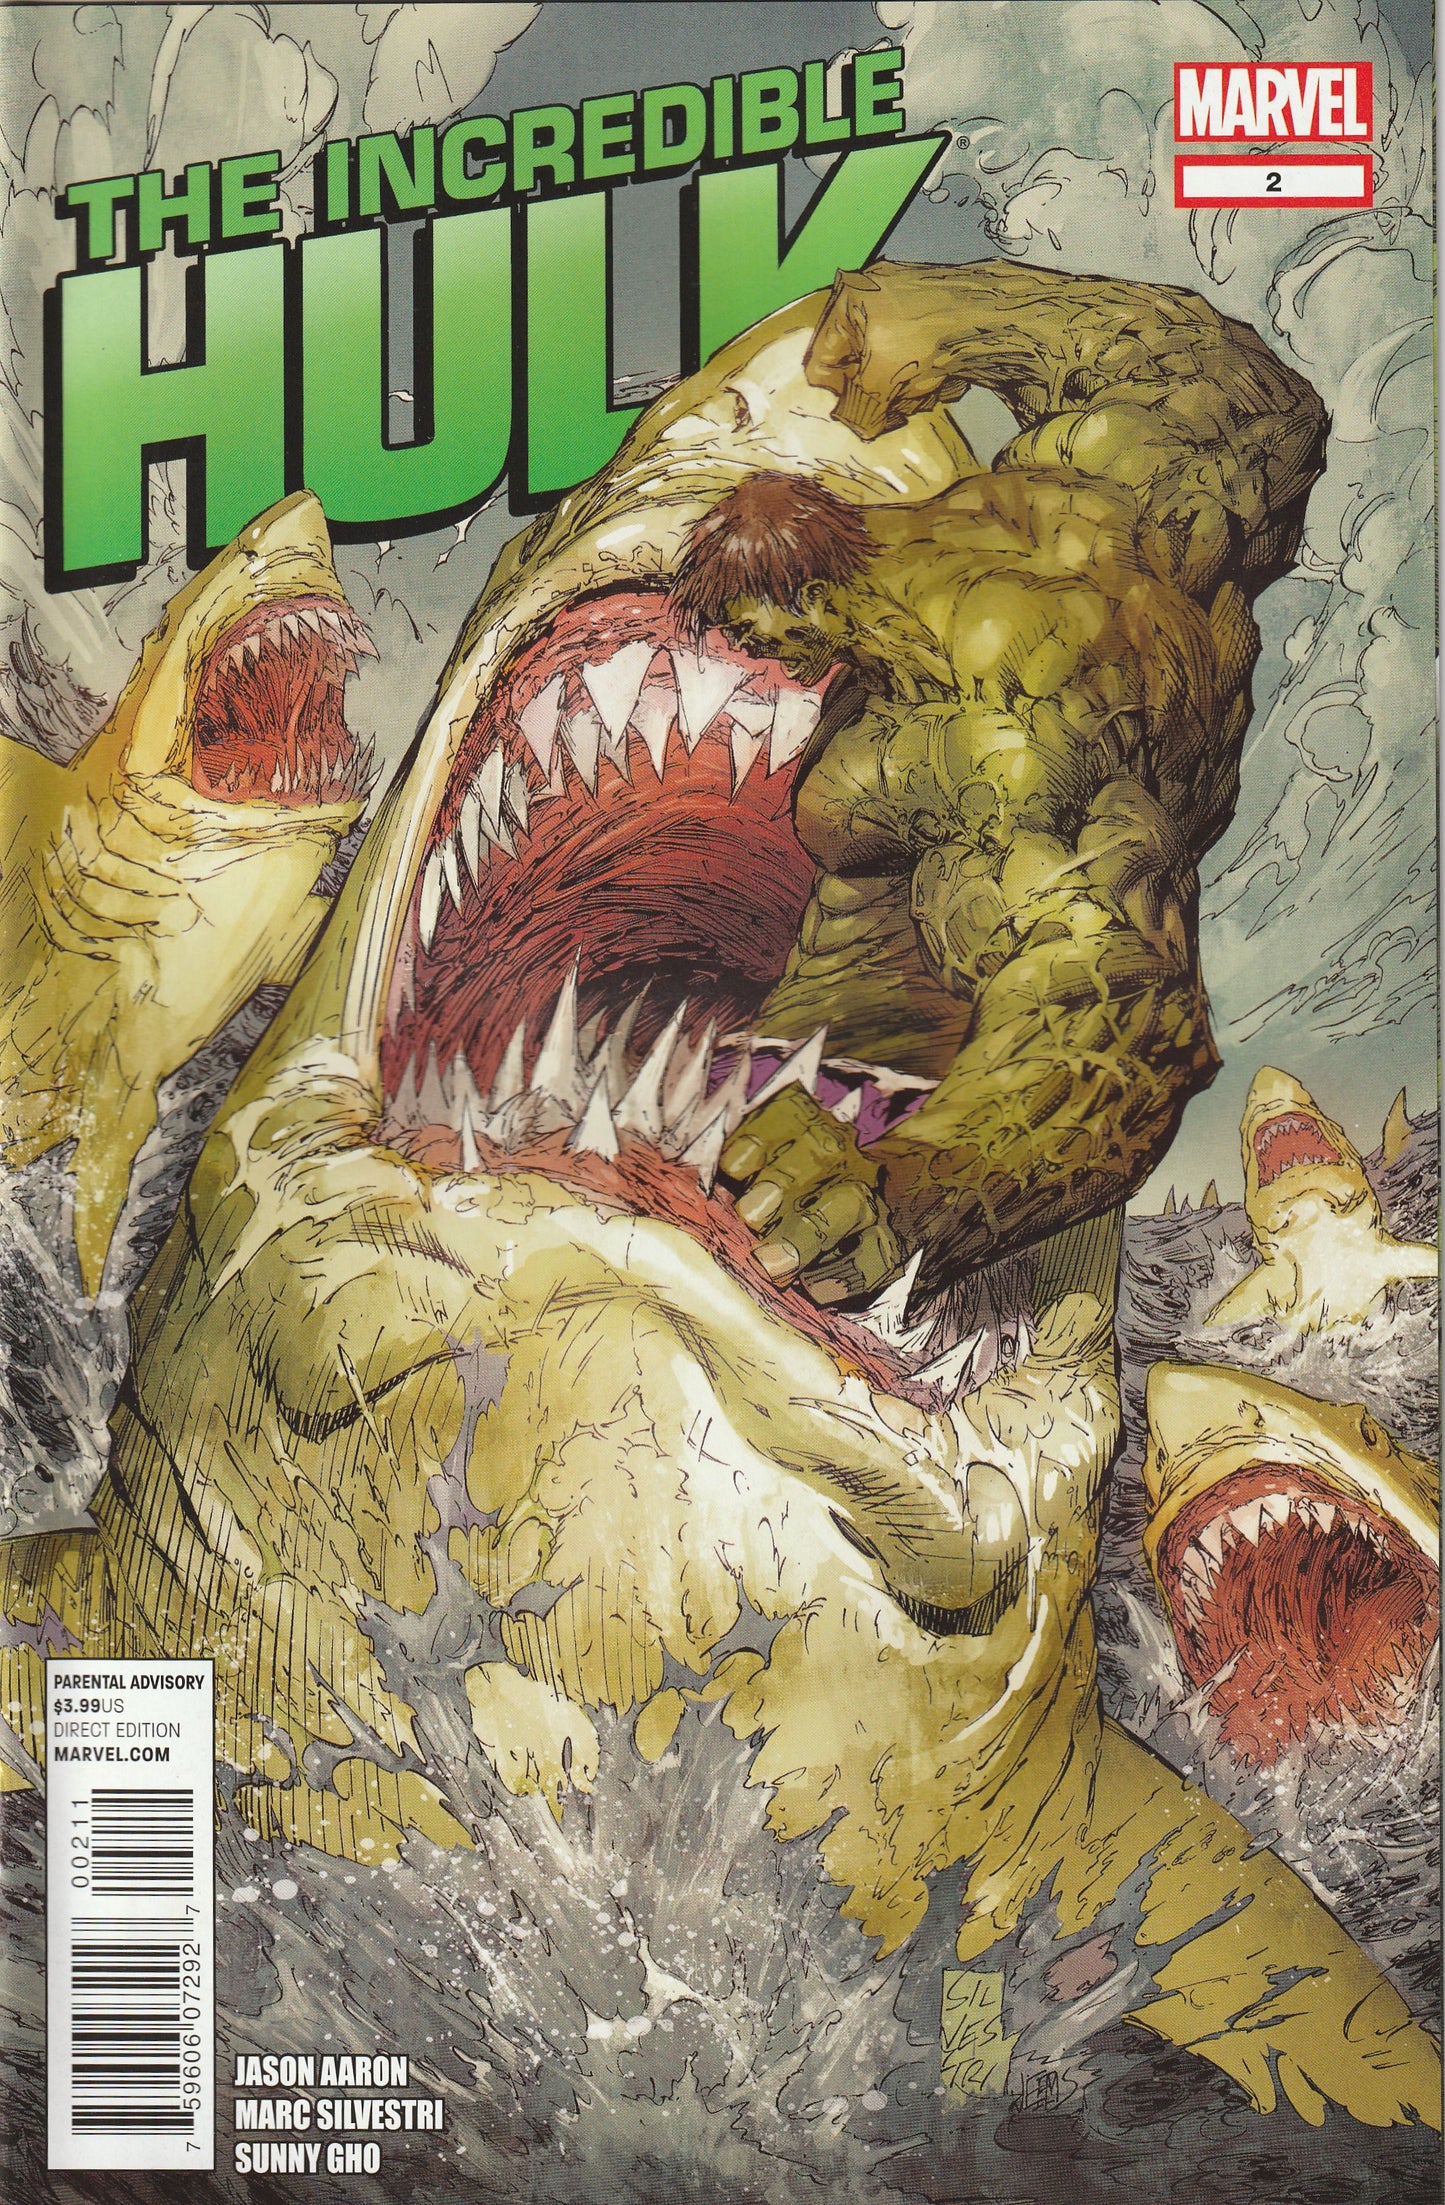 The Incredible Hulk #2 (2012) - 1st Appearance of Mister Gor (Earth-616), 1st Appearance of B.R.A.I.N. (Earth-616)